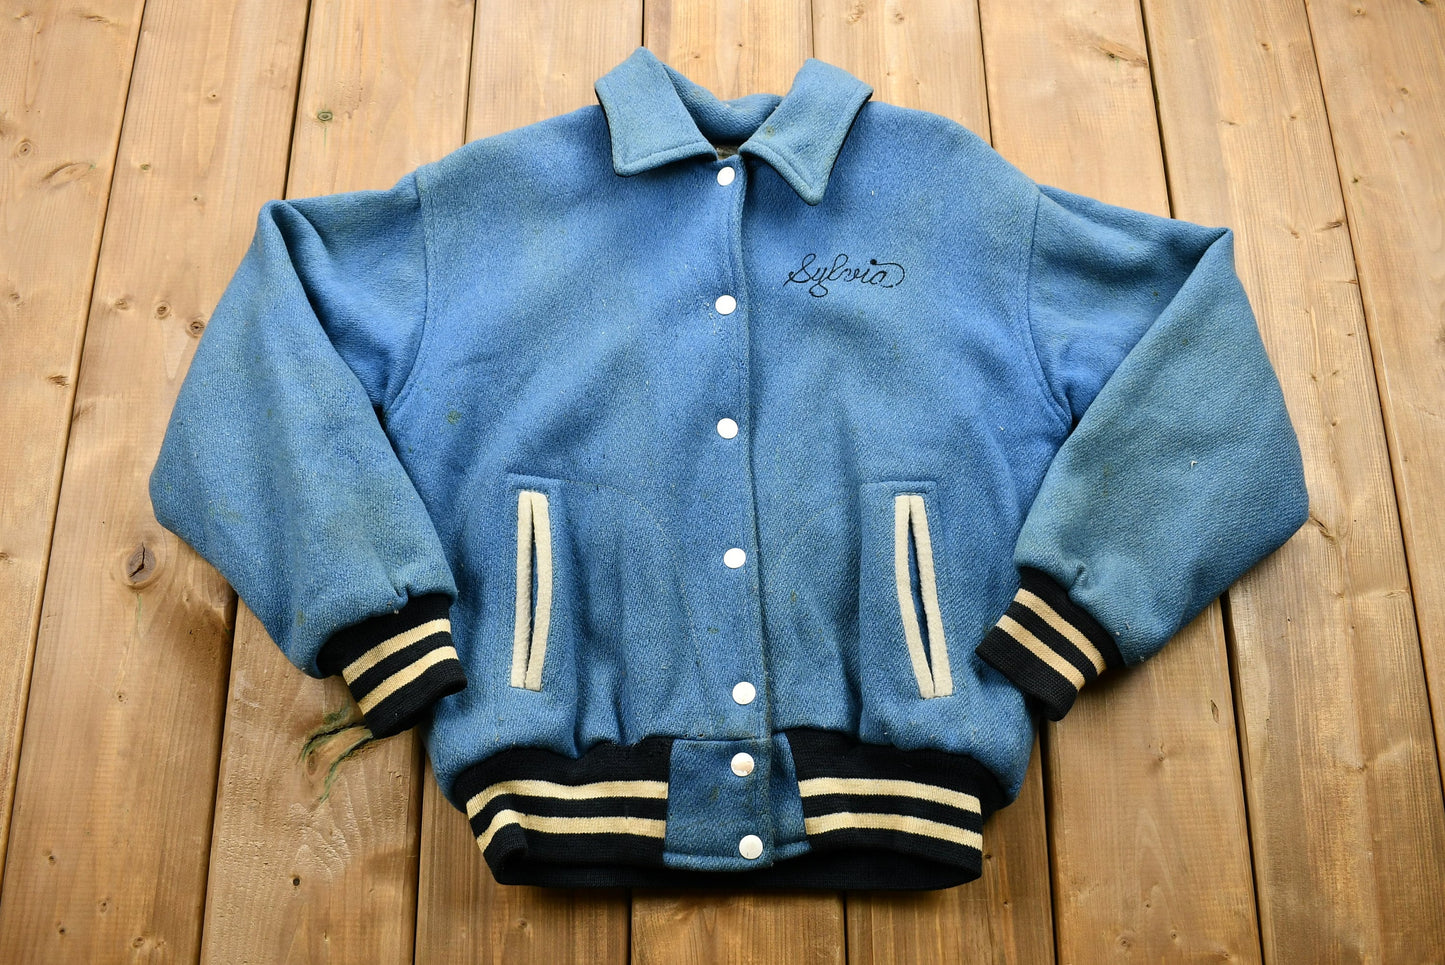 Vintage 1960s Distressed LCMR Jr High Capers Varsity Jacket / True Vintage / Sylvia / Campus / Made in USA / Bomber